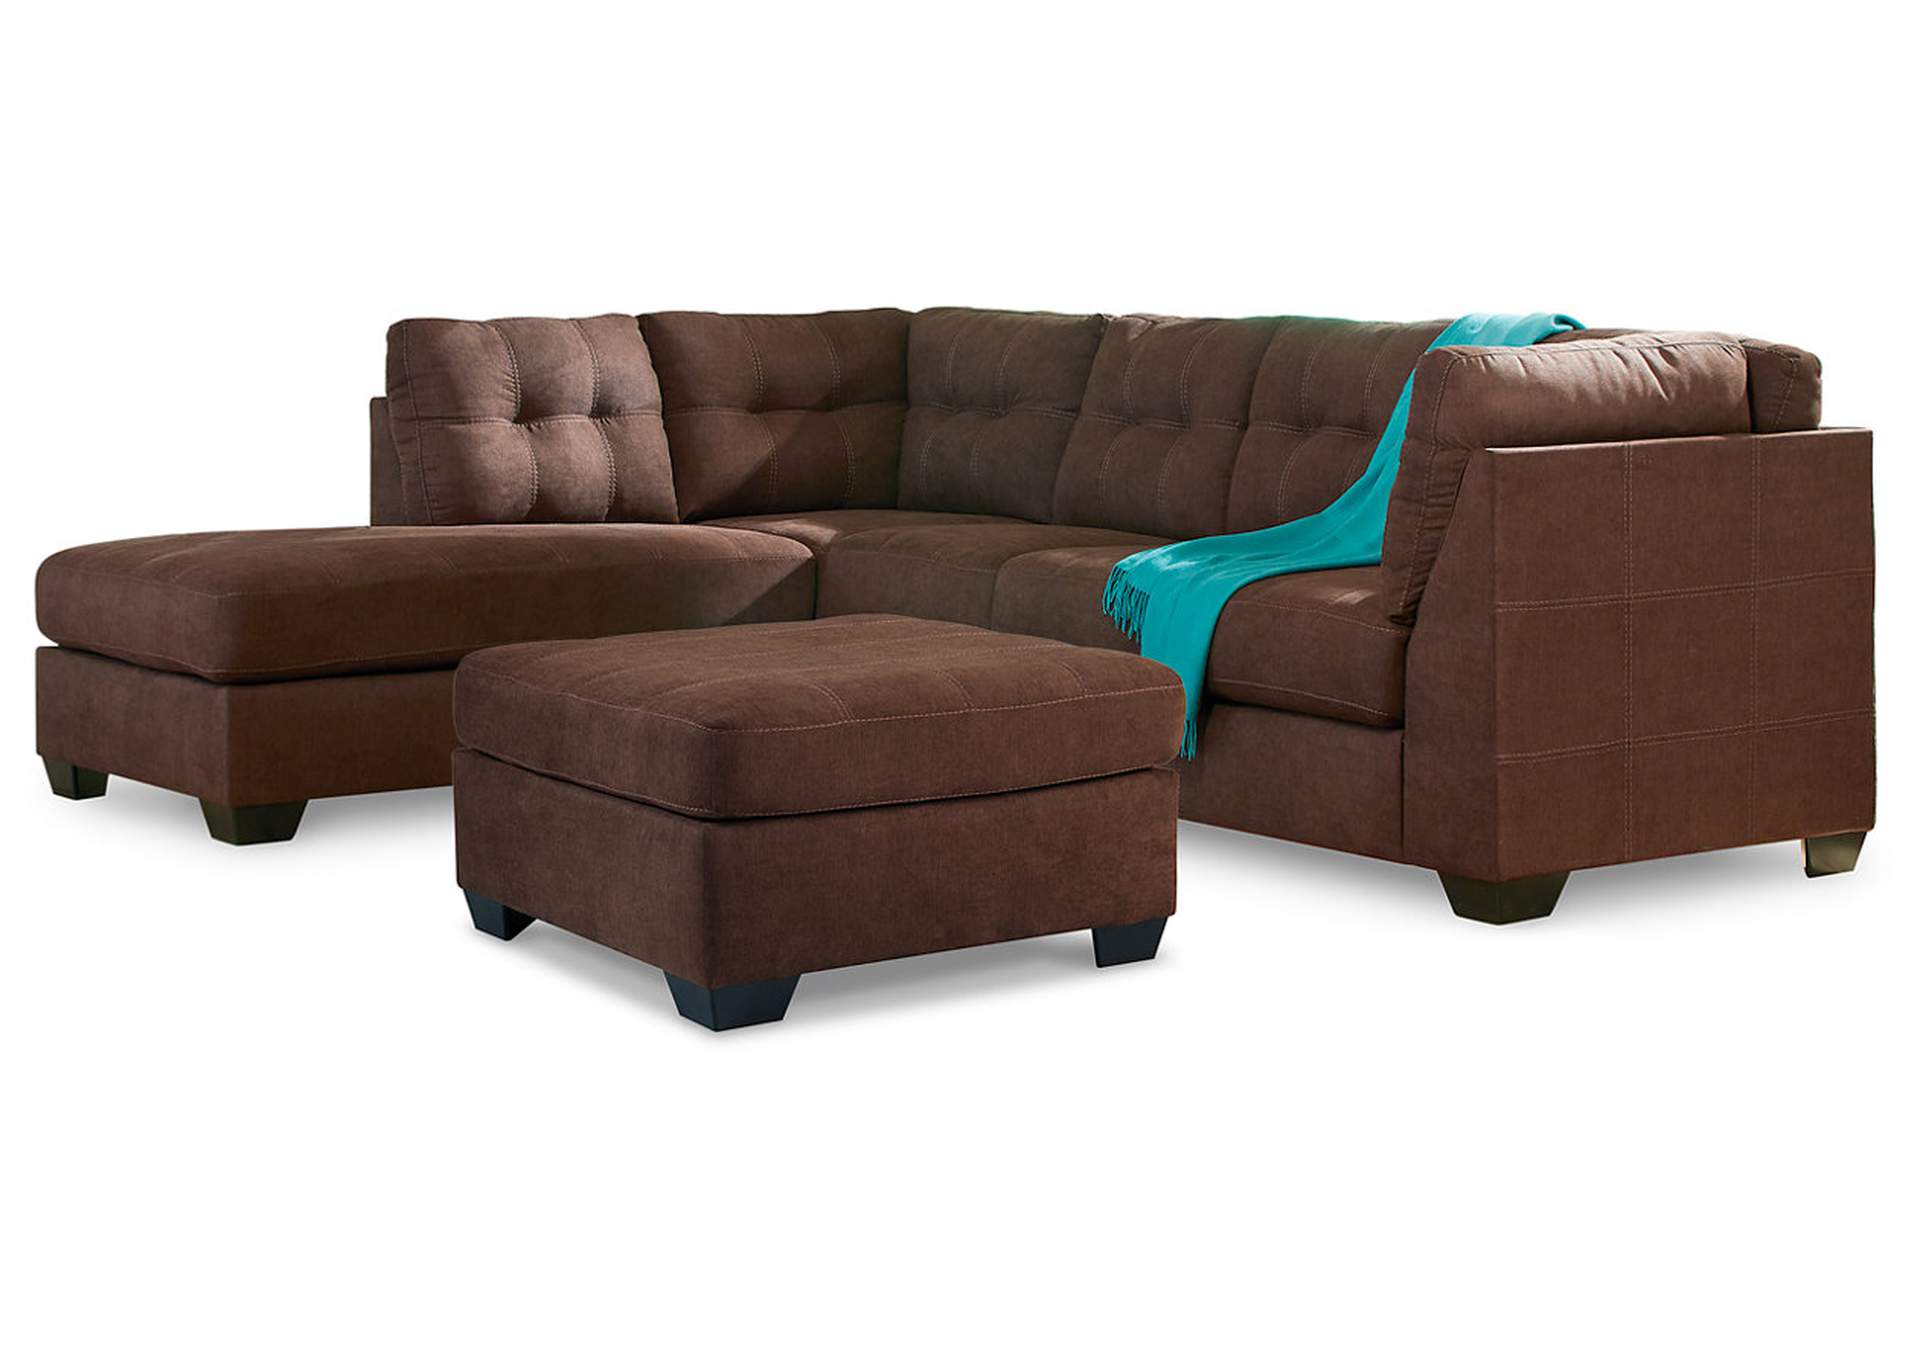 Maier 2-Piece Sectional with Ottoman,Benchcraft